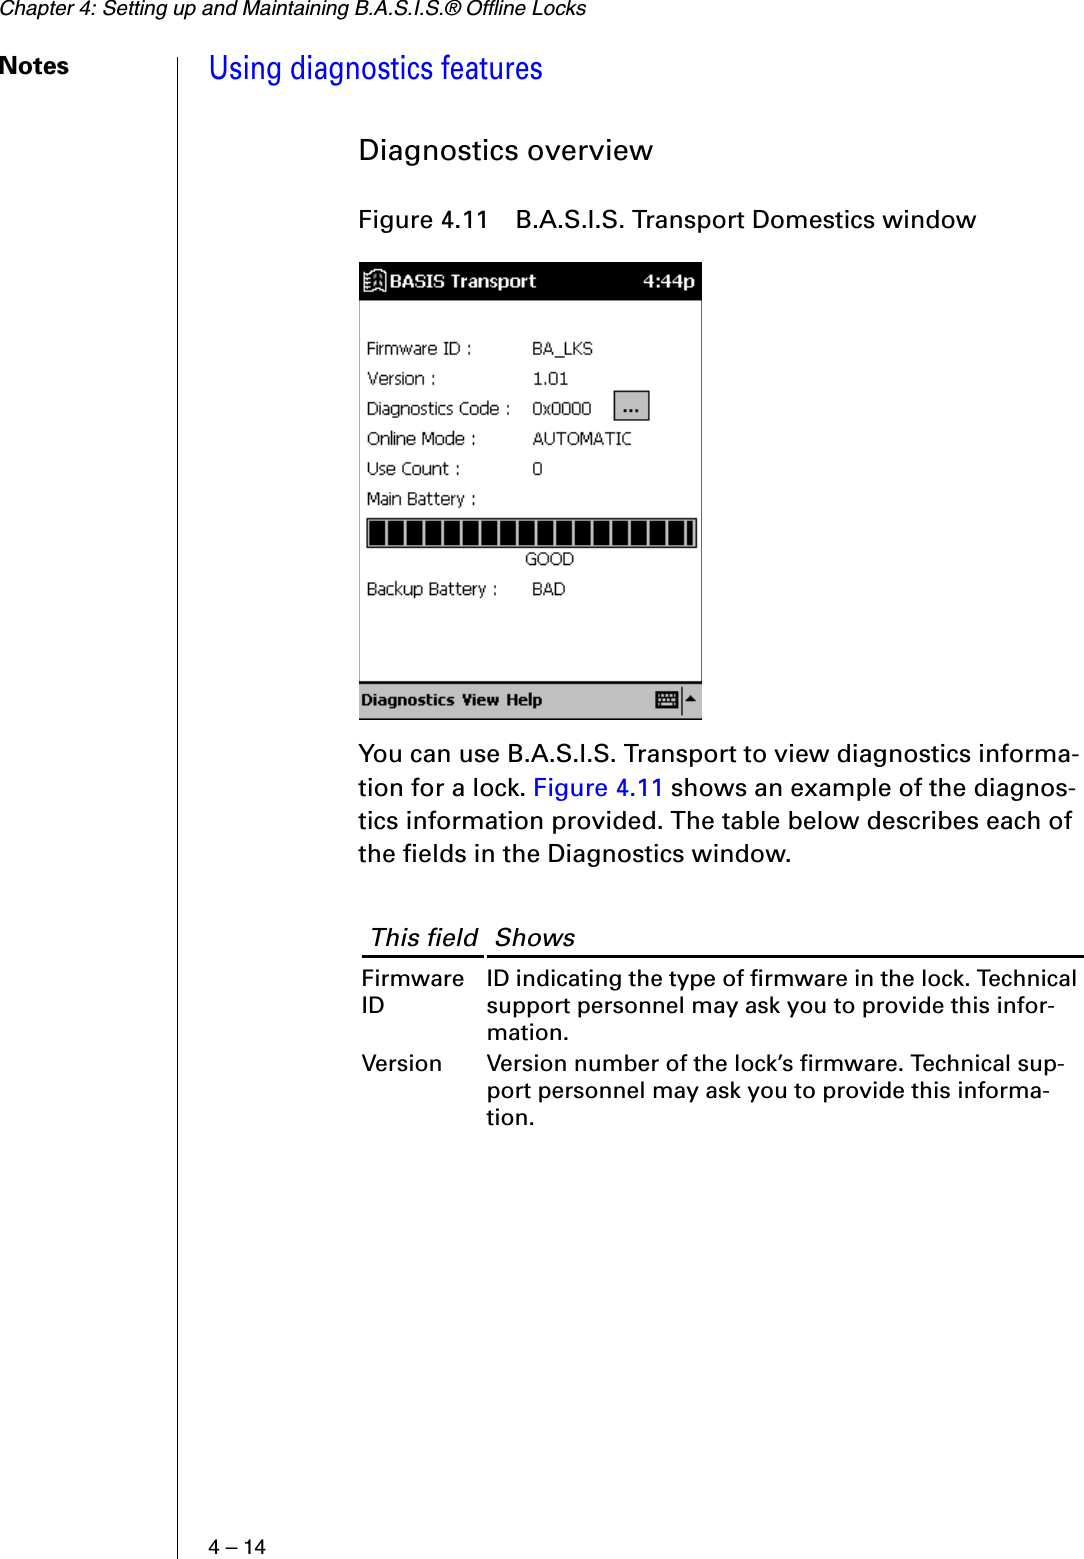 Chapter 4: Setting up and Maintaining B.A.S.I.S.® Offline Locks4 – 14NotesUsing diagnostics featuresDiagnostics overviewYou can use B.A.S.I.S. Transport to view diagnostics informa-tion for a lock. Figure 4.11 shows an example of the diagnos-tics information provided. The table below describes each of the fields in the Diagnostics window.Figure 4.11  B.A.S.I.S. Transport Domestics window This field  ShowsFirmware IDID indicating the type of firmware in the lock. Technical support personnel may ask you to provide this infor-mation.Version Version number of the lock’s firmware. Technical sup-port personnel may ask you to provide this informa-tion.